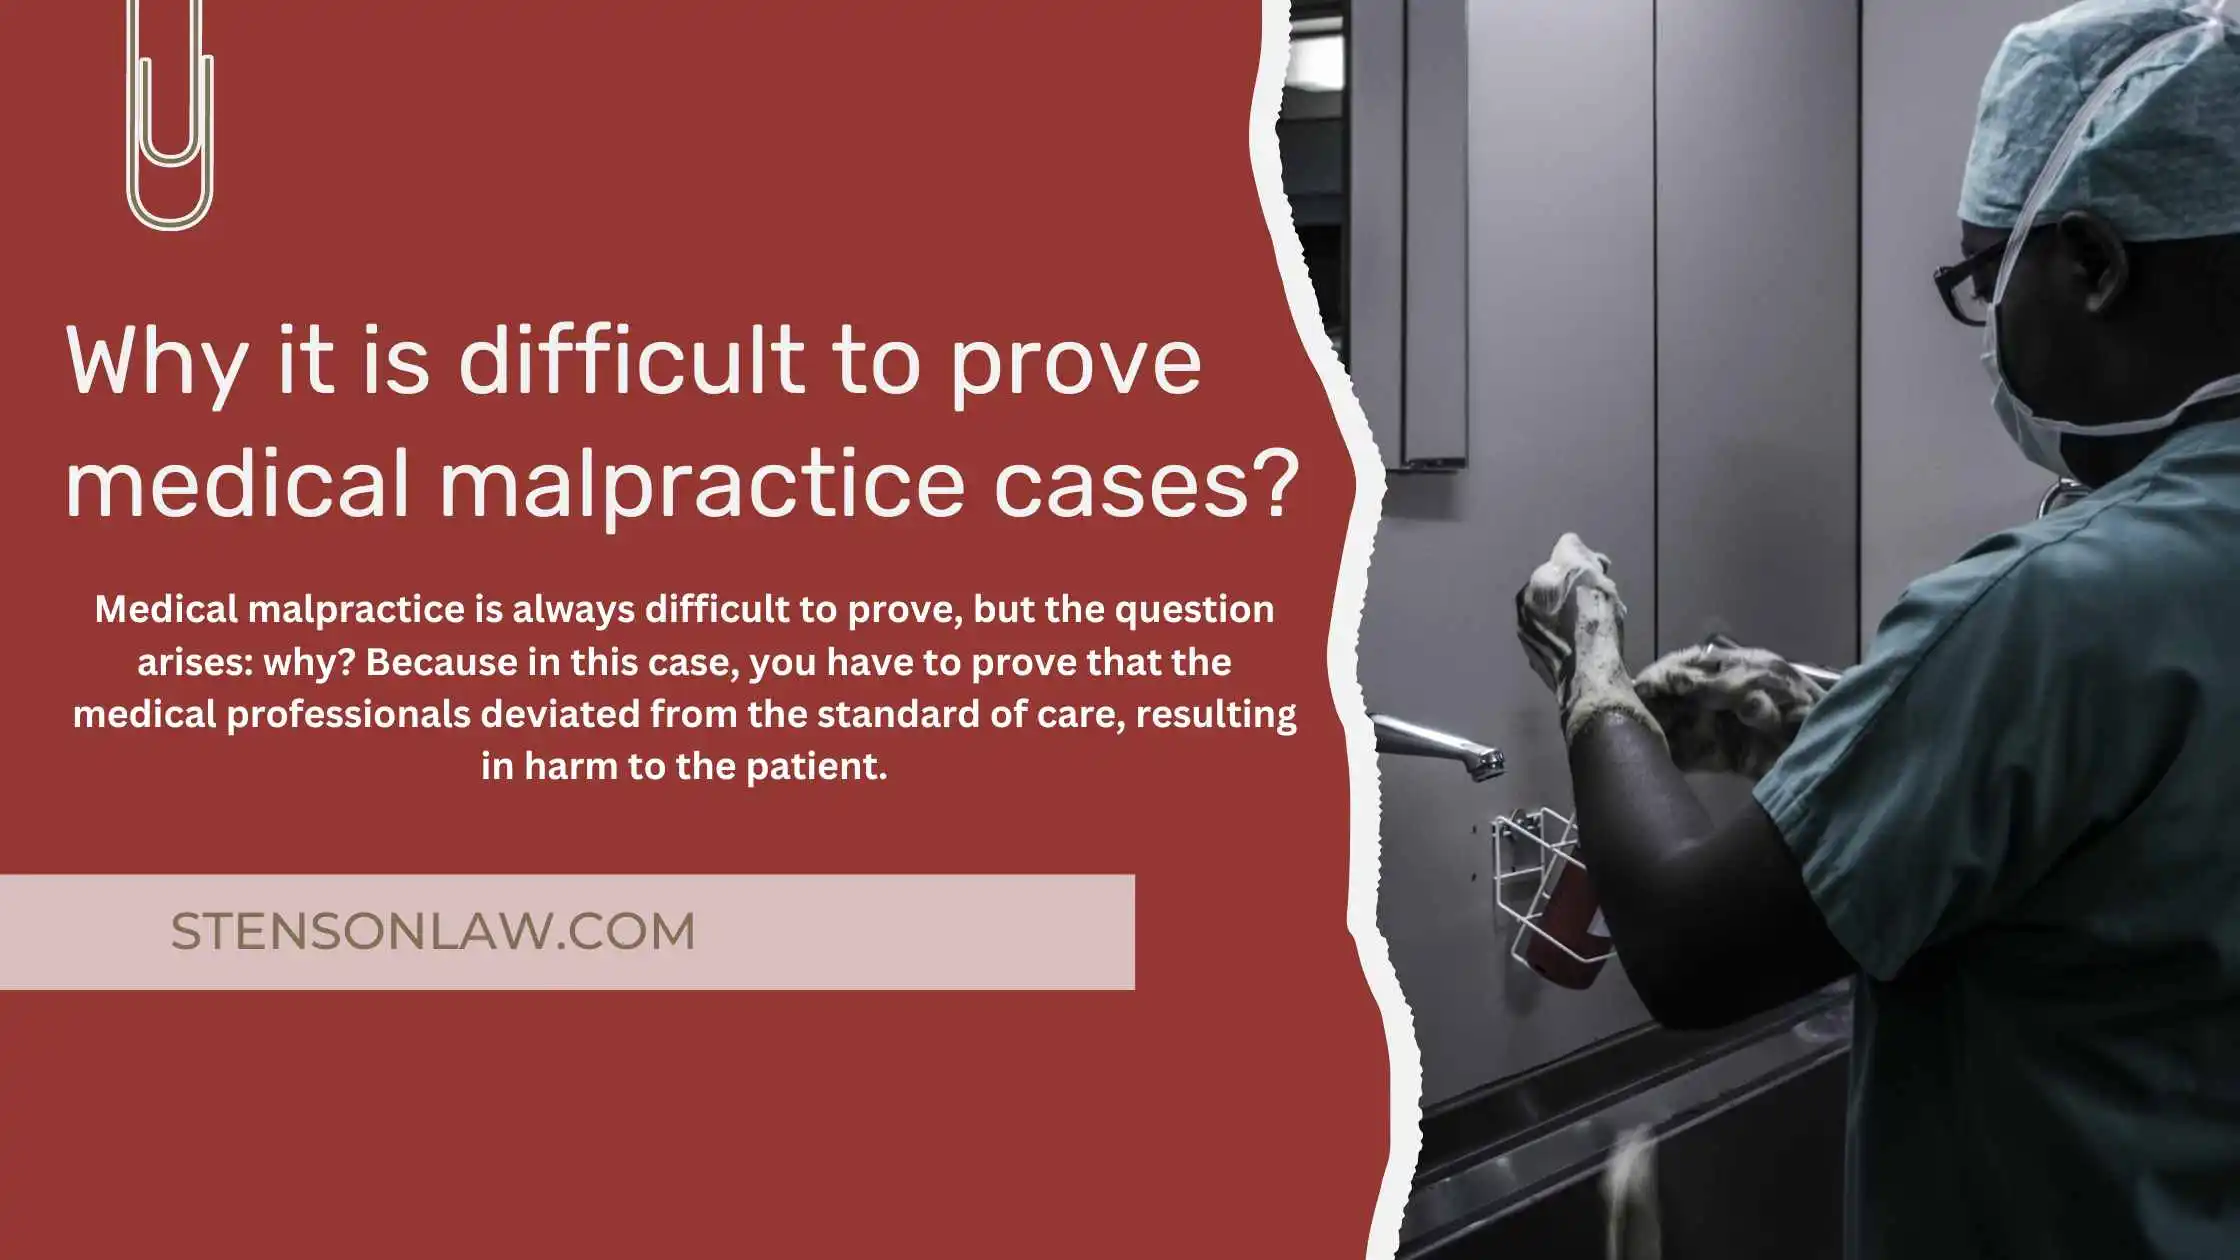 Why it is difficult to prove medical malpractice cases